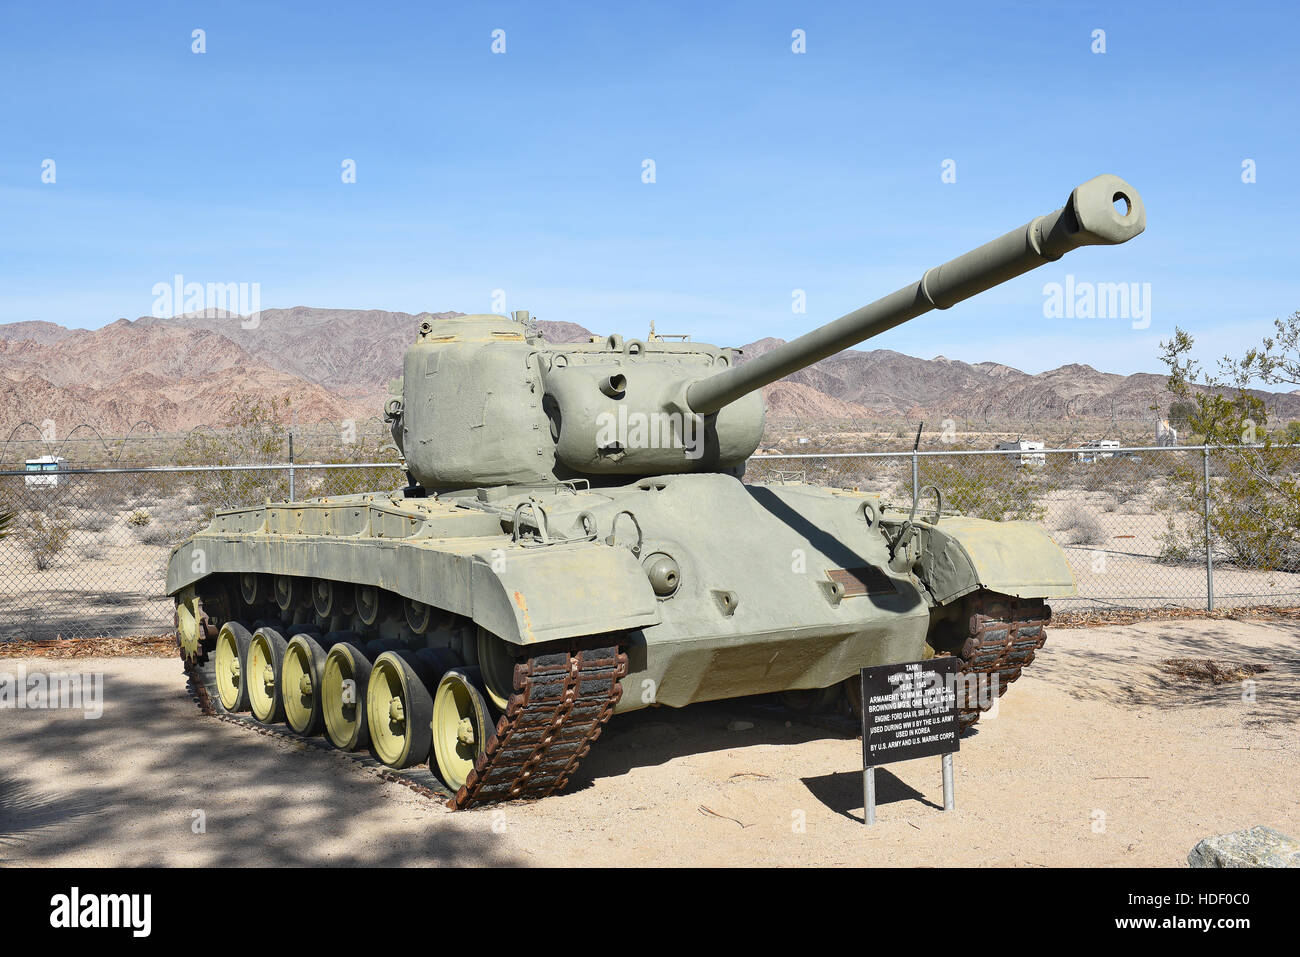 CHIRIACO SUMMIT, CA - DECEMBER 10, 2016: A M26 Pershing Tank. The  WWII tank, also used in Korea is on display at the General Patton Memorial Museum Stock Photo